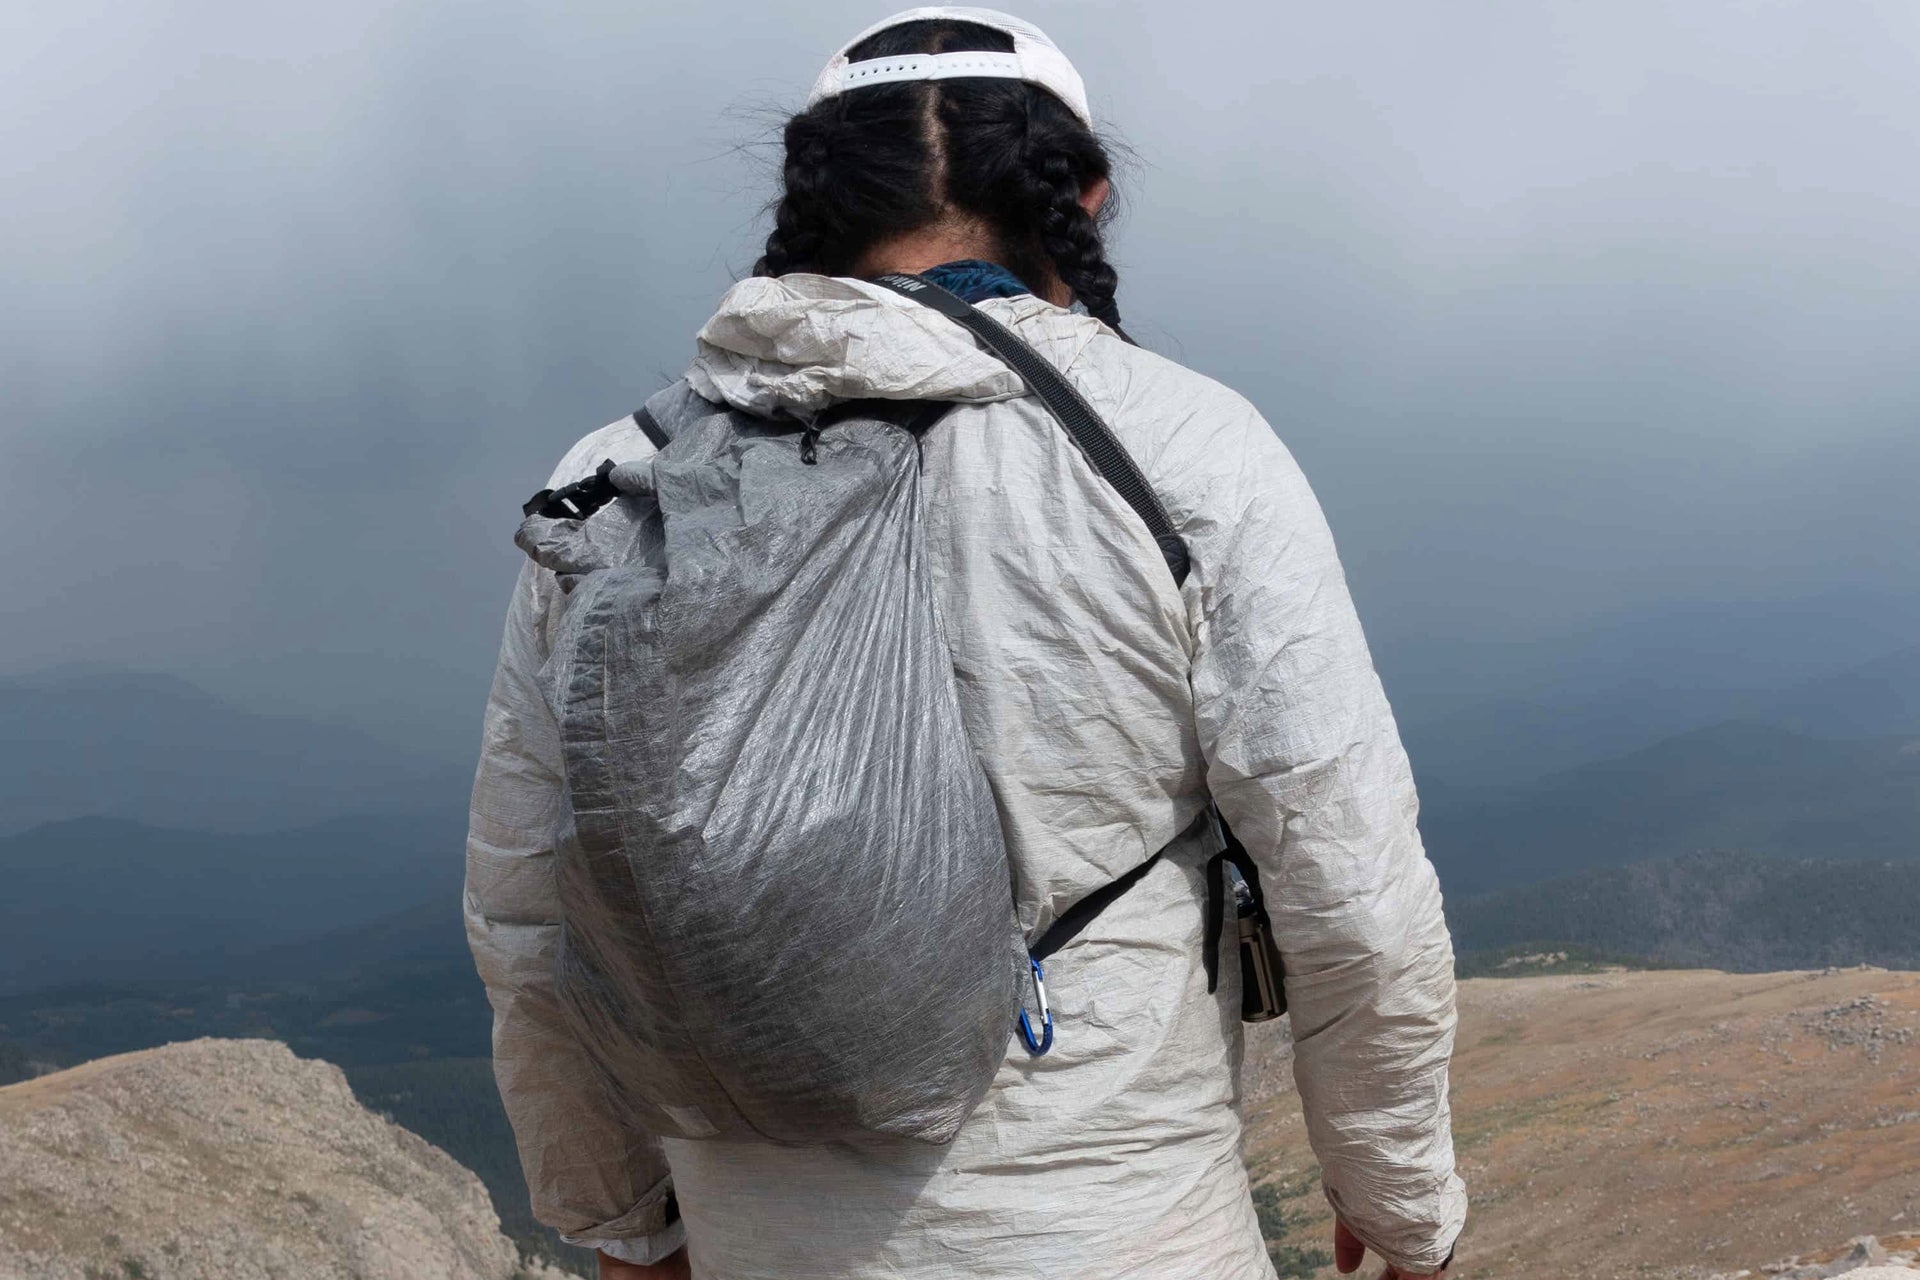 A man standing on top of a mountain with a backpack.